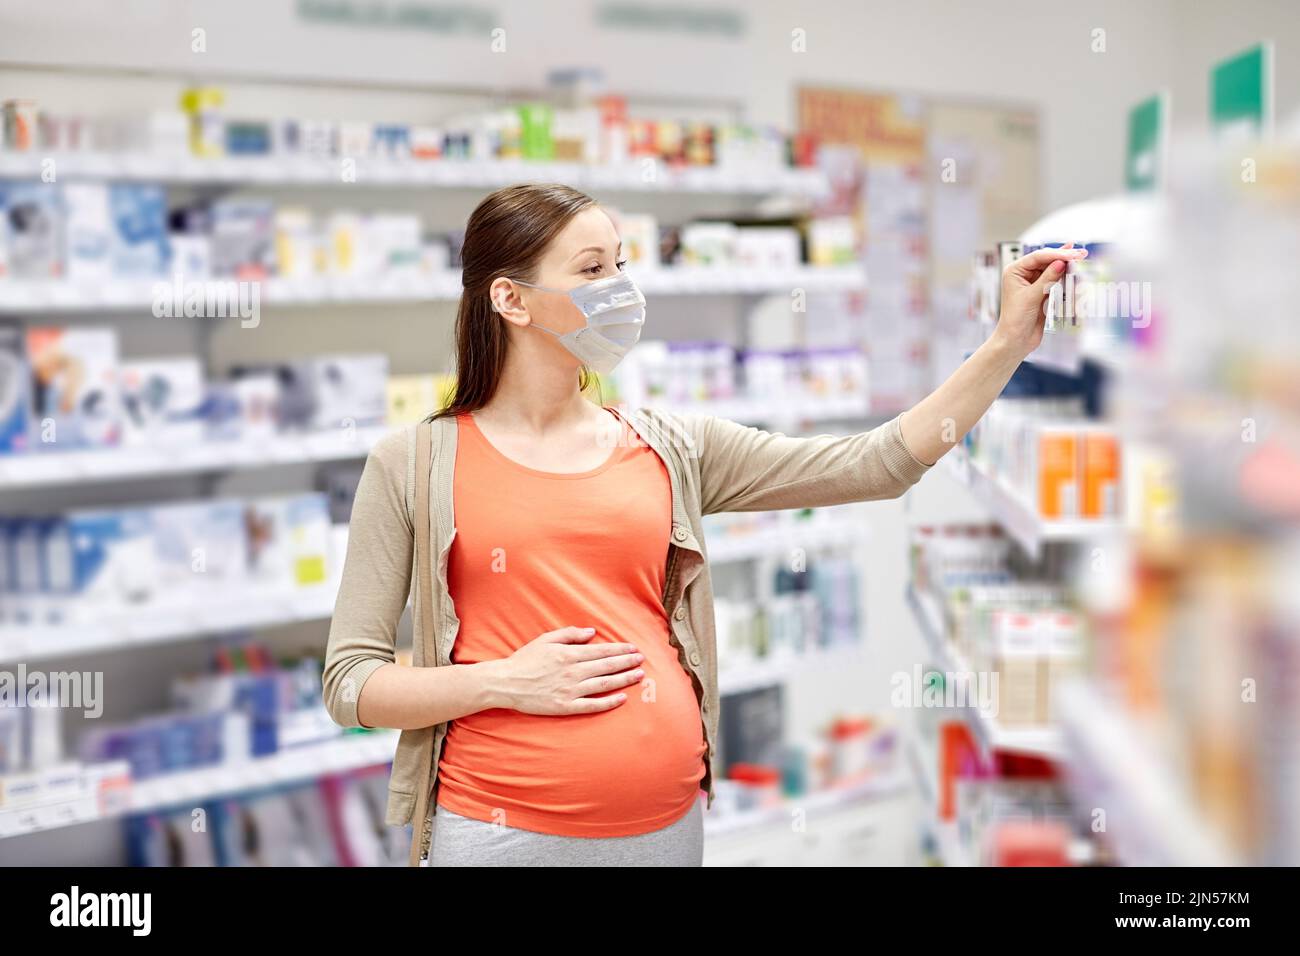 pregnant woman in mask buys medicine at pharmacy Stock Photo